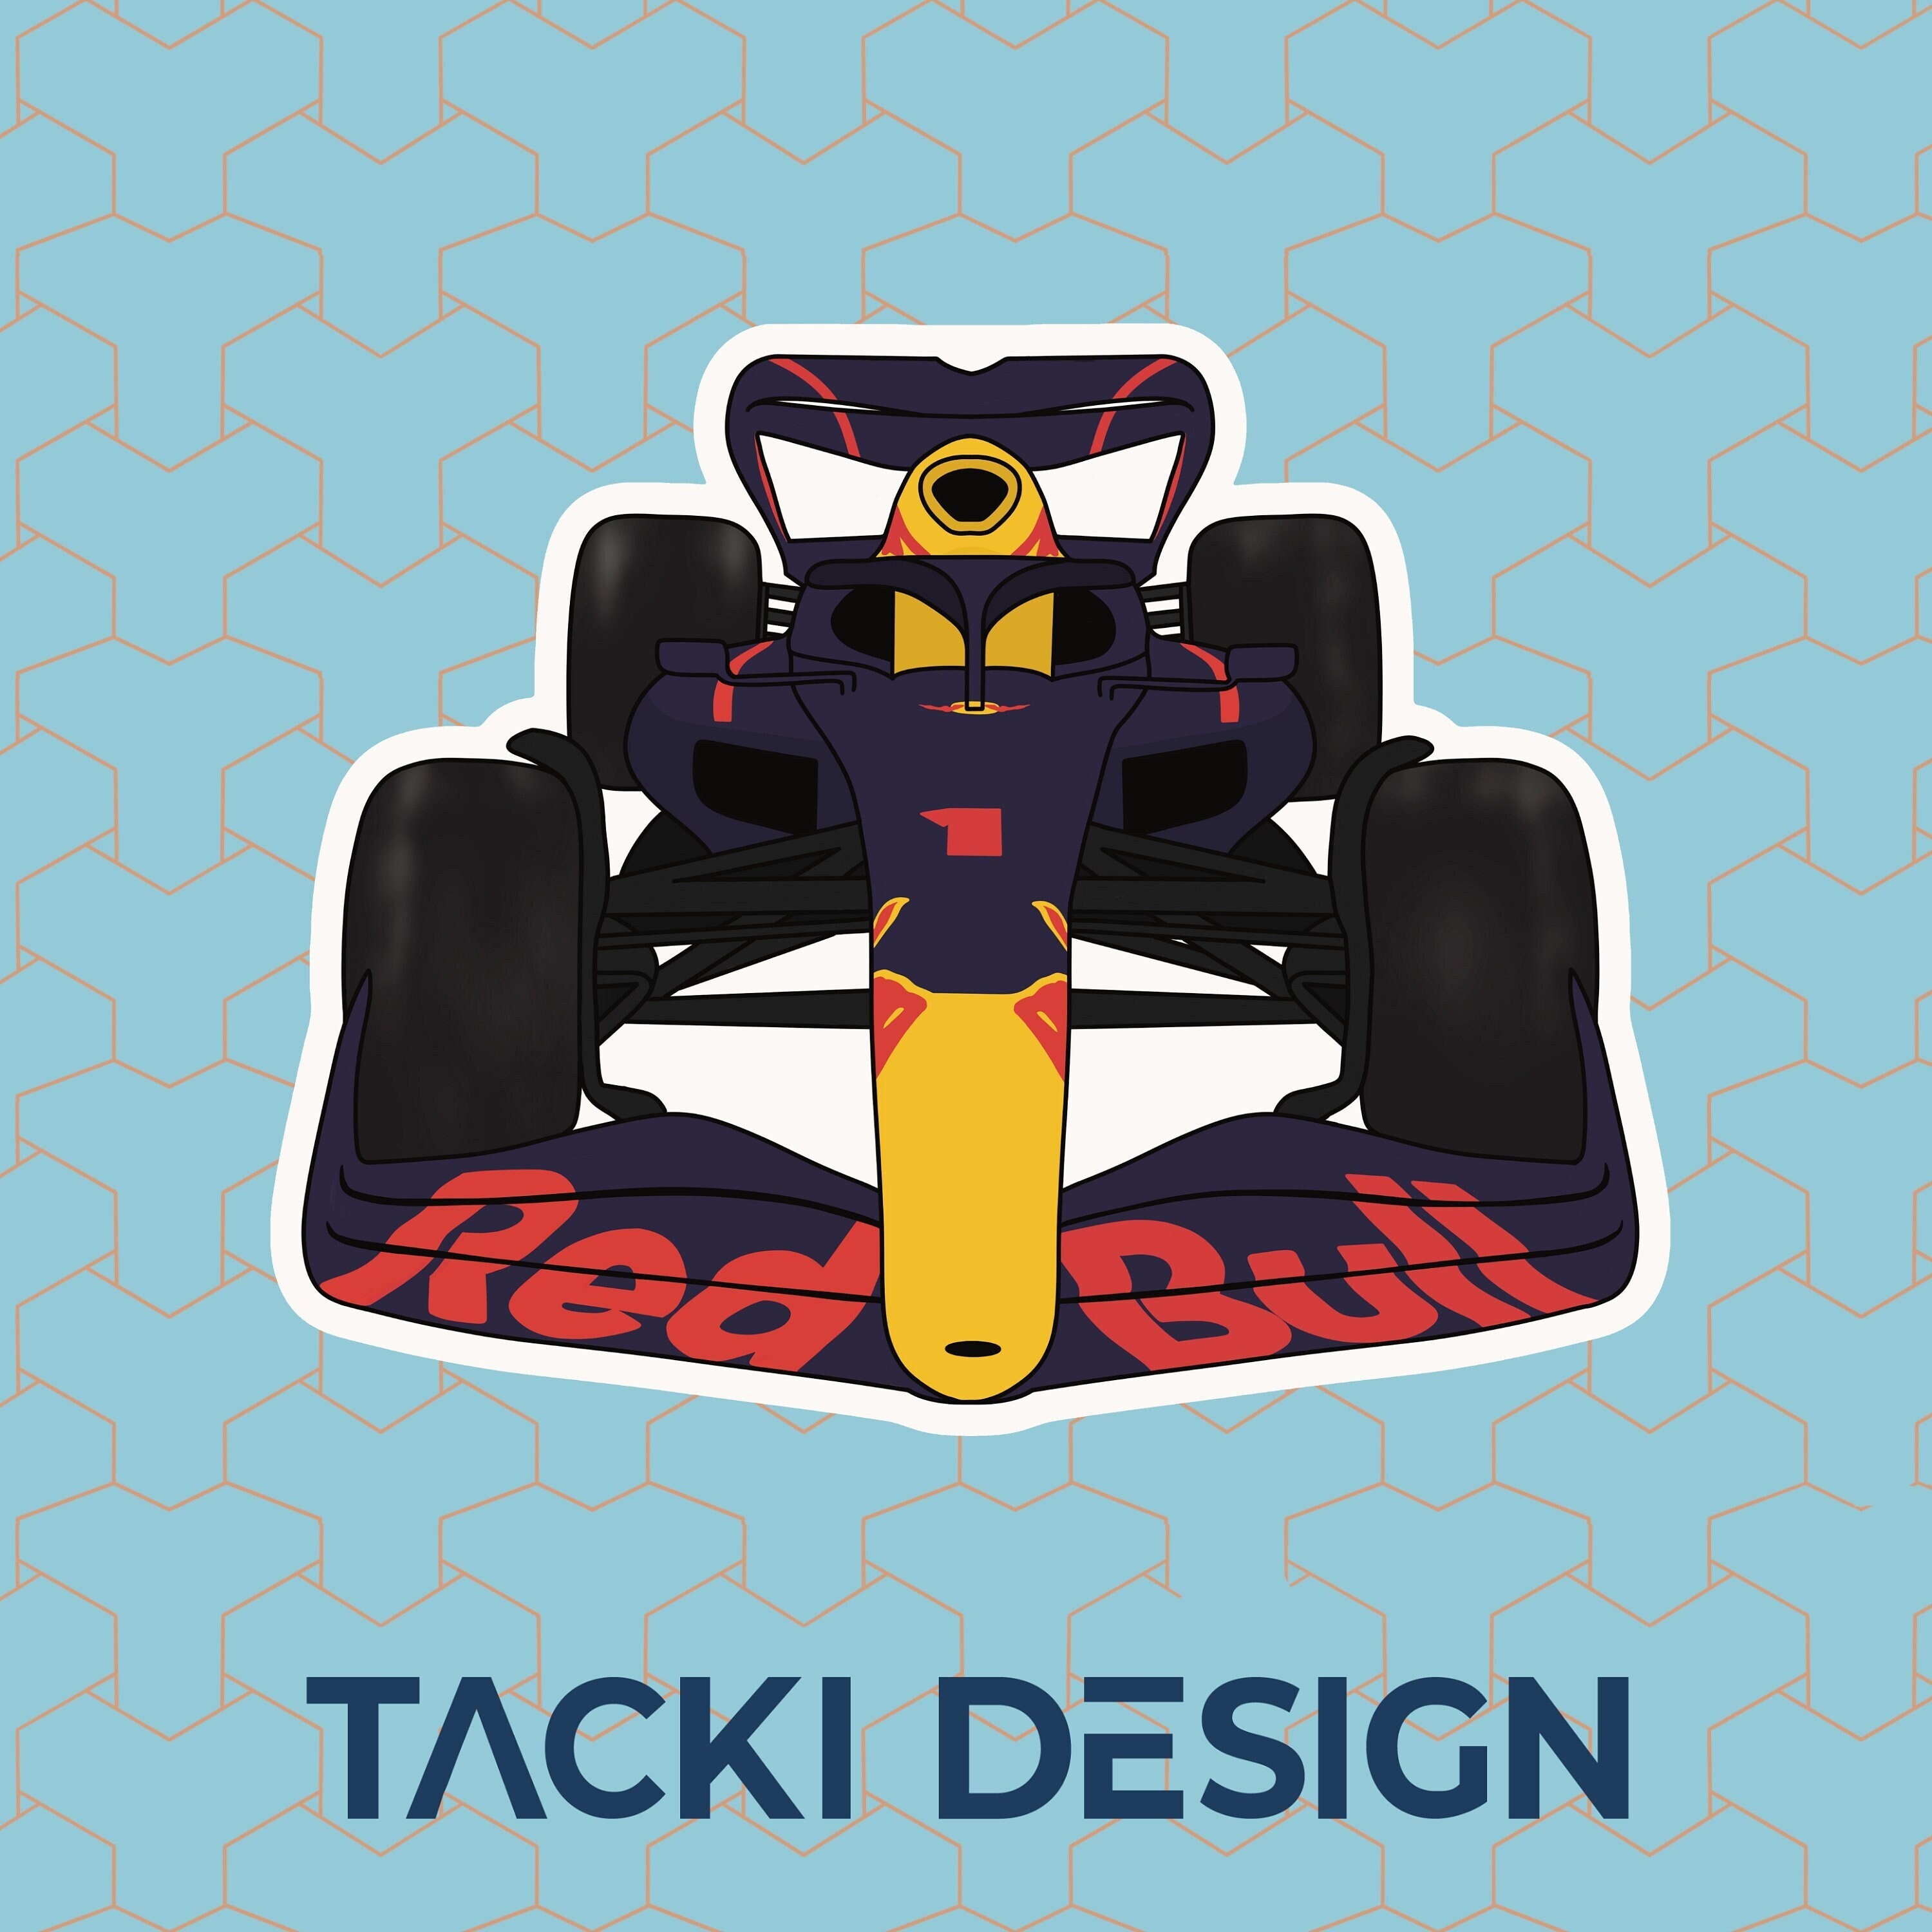 Design, Redbull Stickers Approximately 9 X 6 12